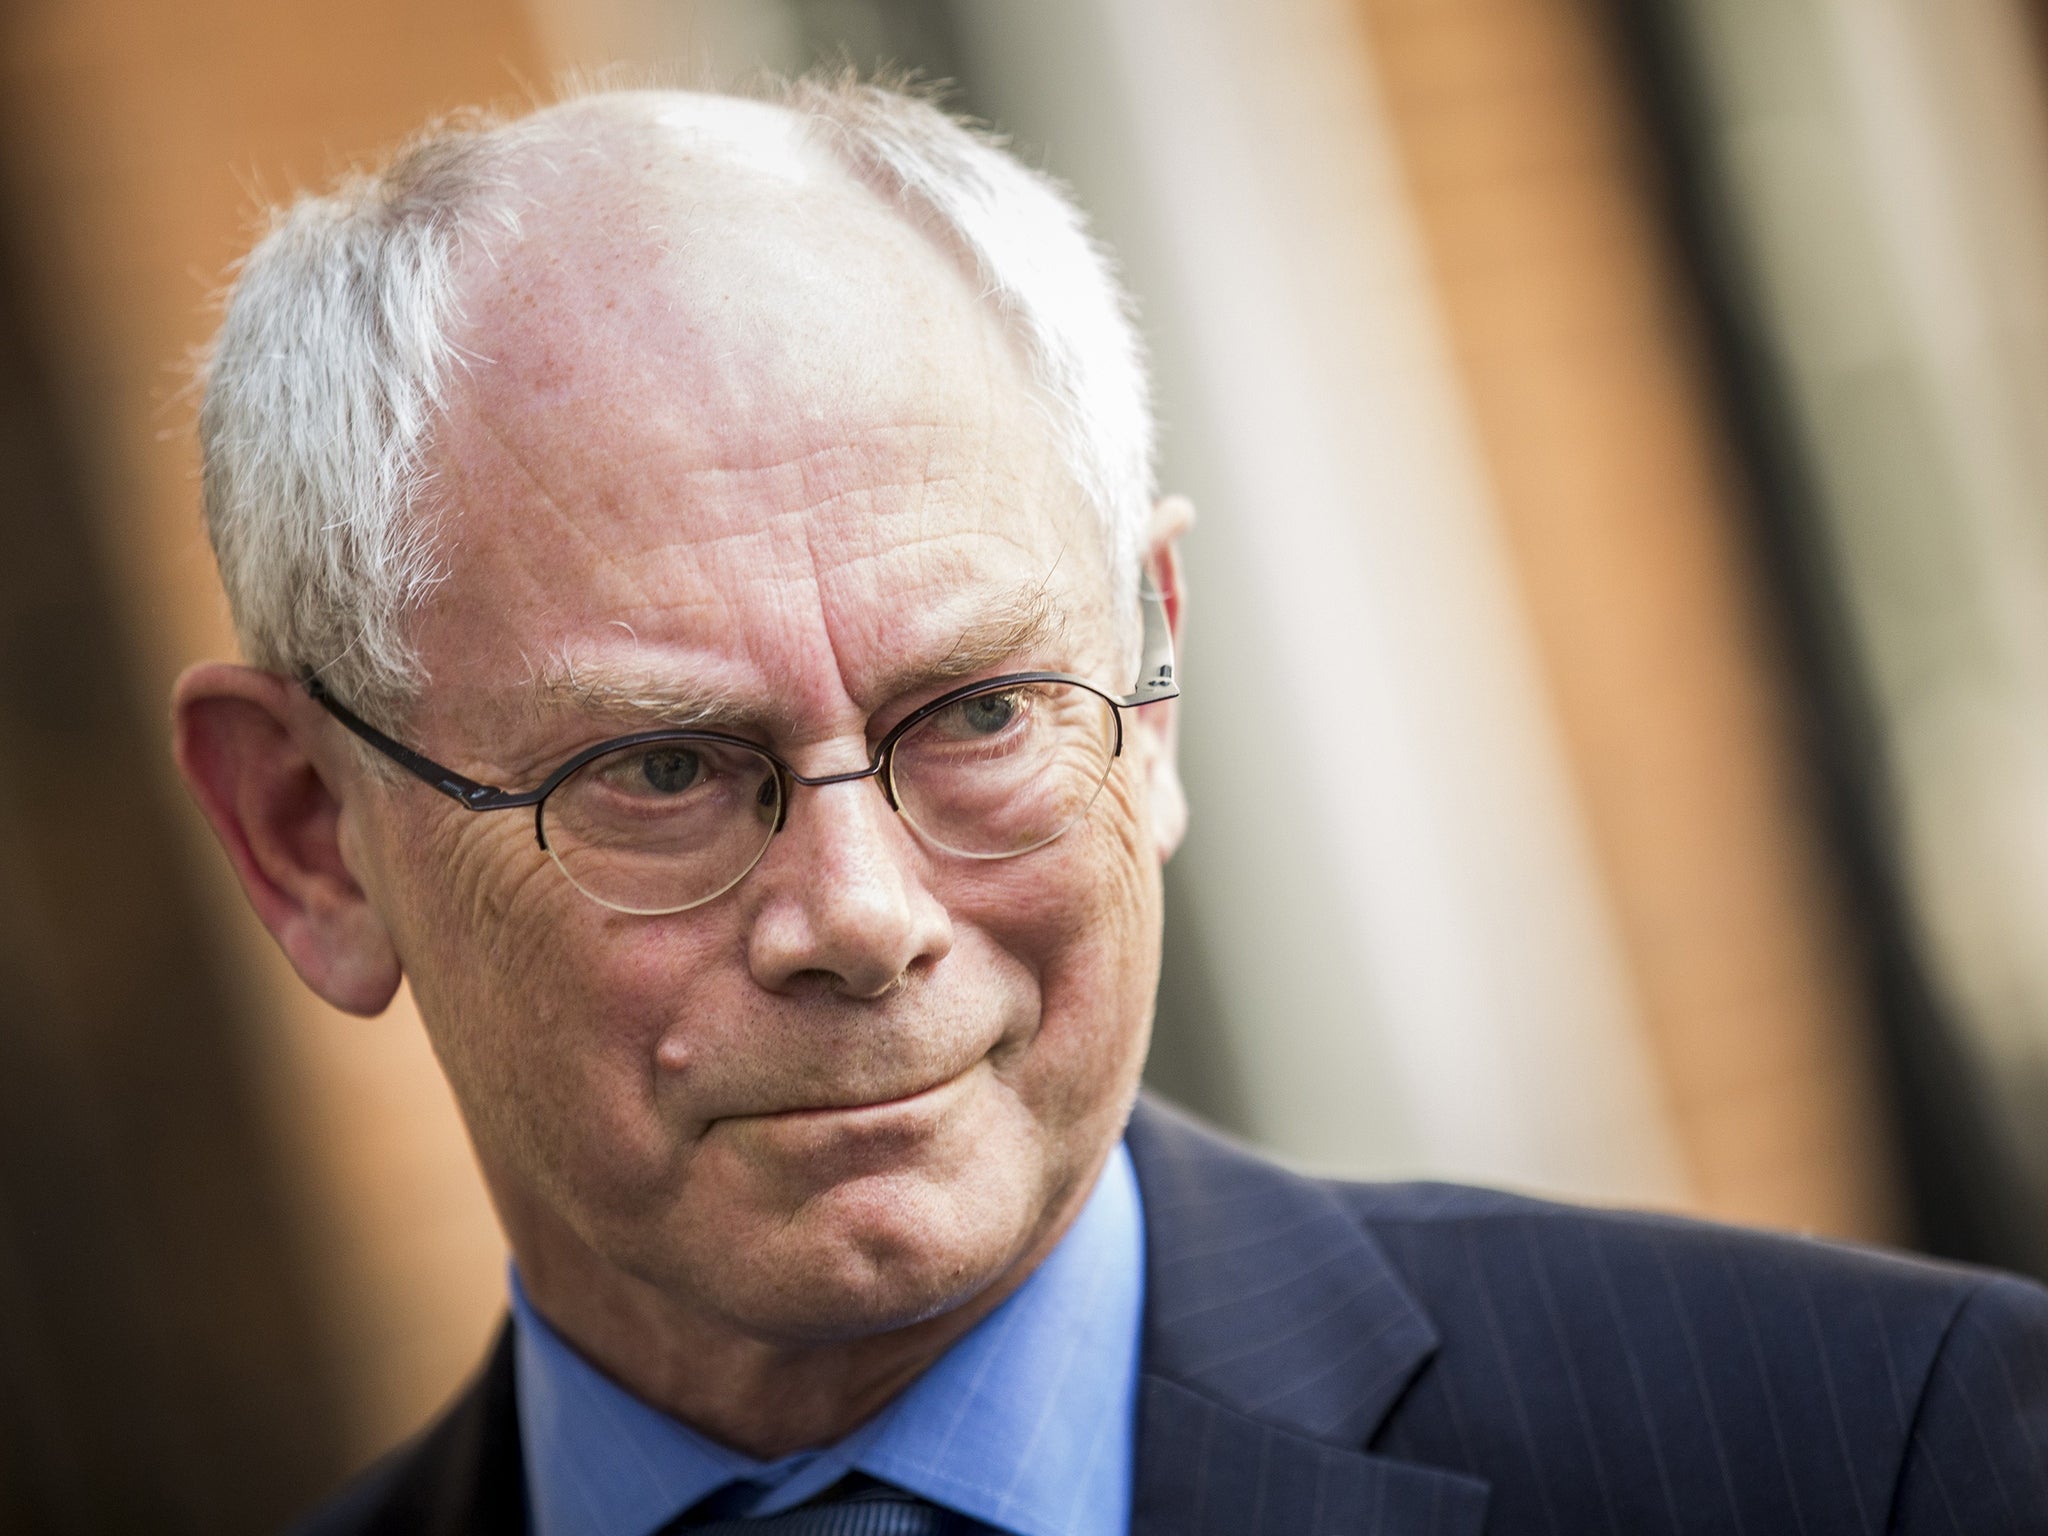 European Council President Herman Van Rompuy leaves the post after five years at the helm that were widely seen as successful